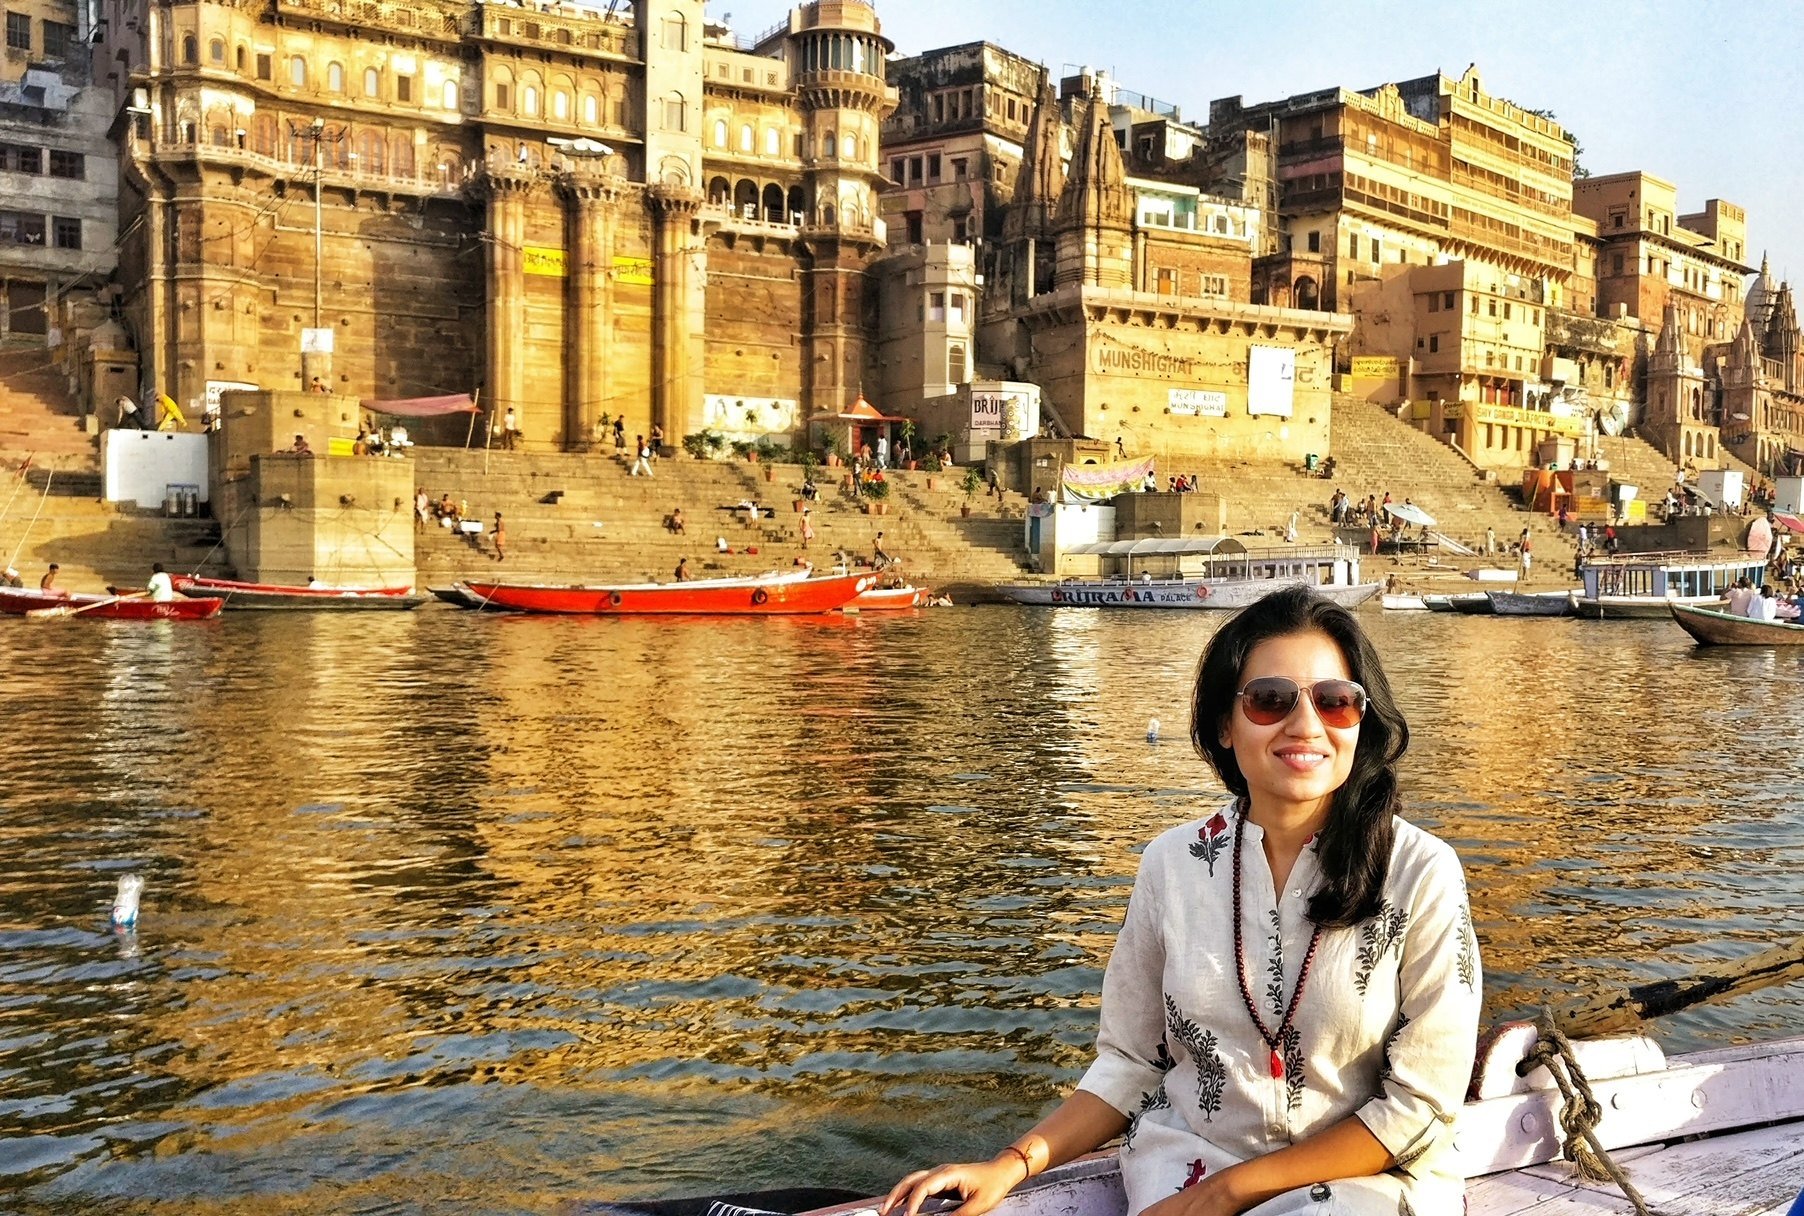 Neeti Mehra, a slow living coach, on a “praycation” in Varanasi, one of India’s holy cities. A growing number of Indians appear to be taking more spiritual holidays – where they visit places of worship but add in elements of a luxury trip as well. Photo: Neeti Mehra